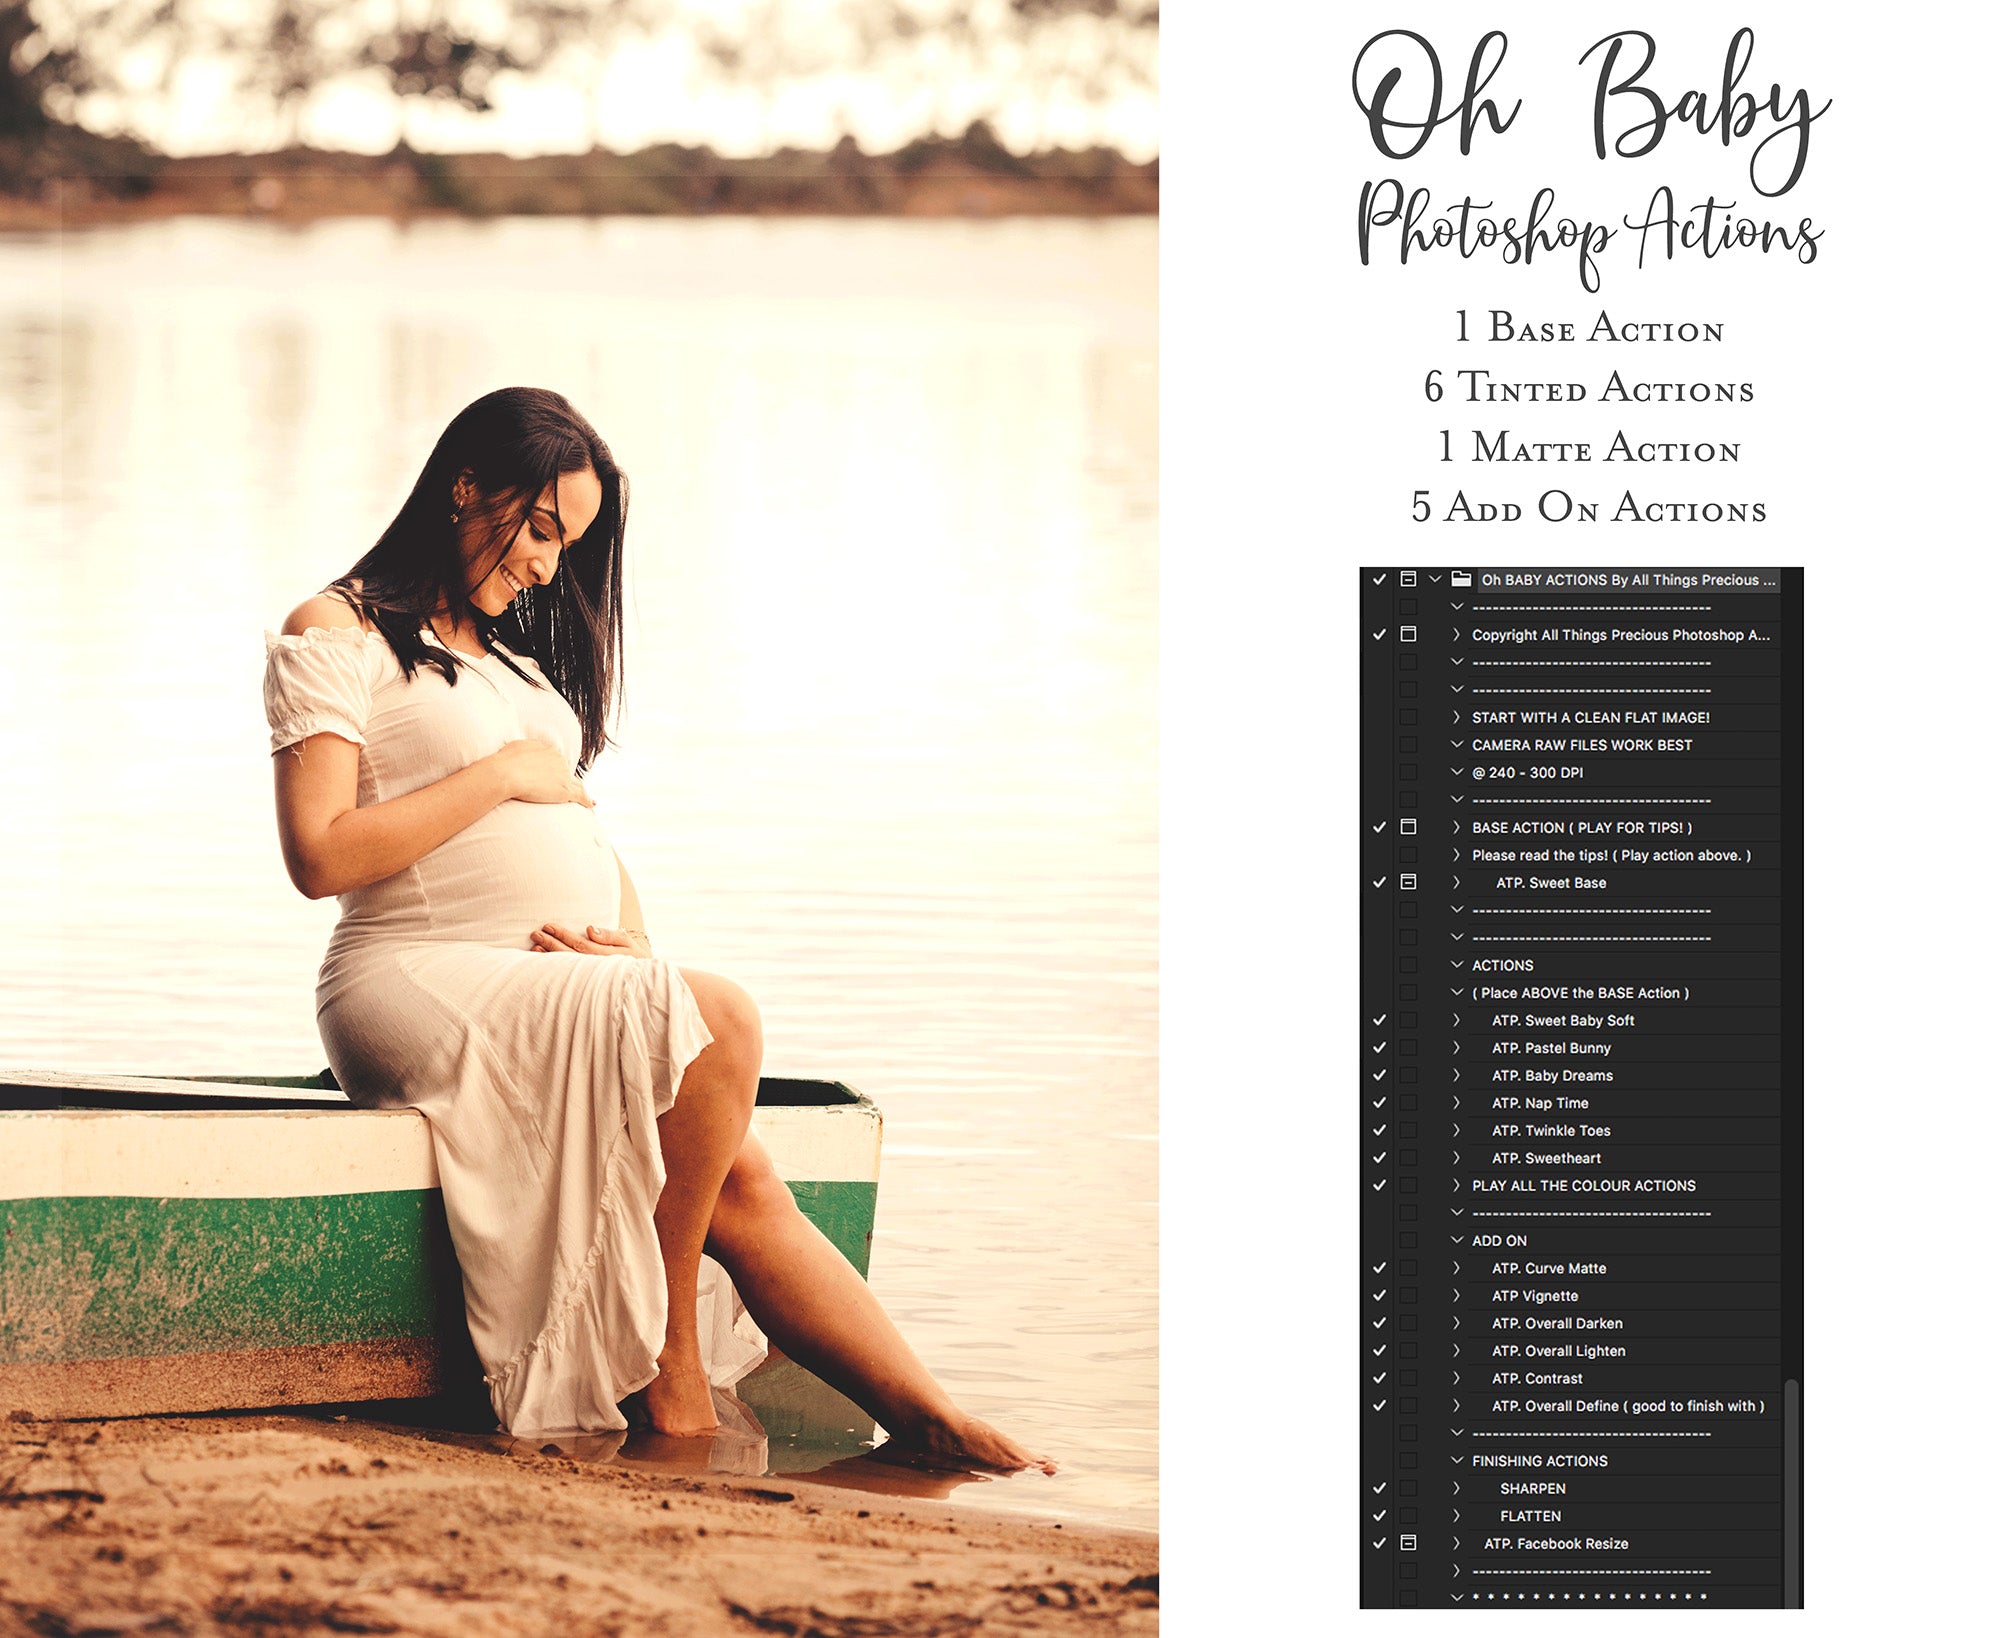 Photoshop Actions - OH BABY